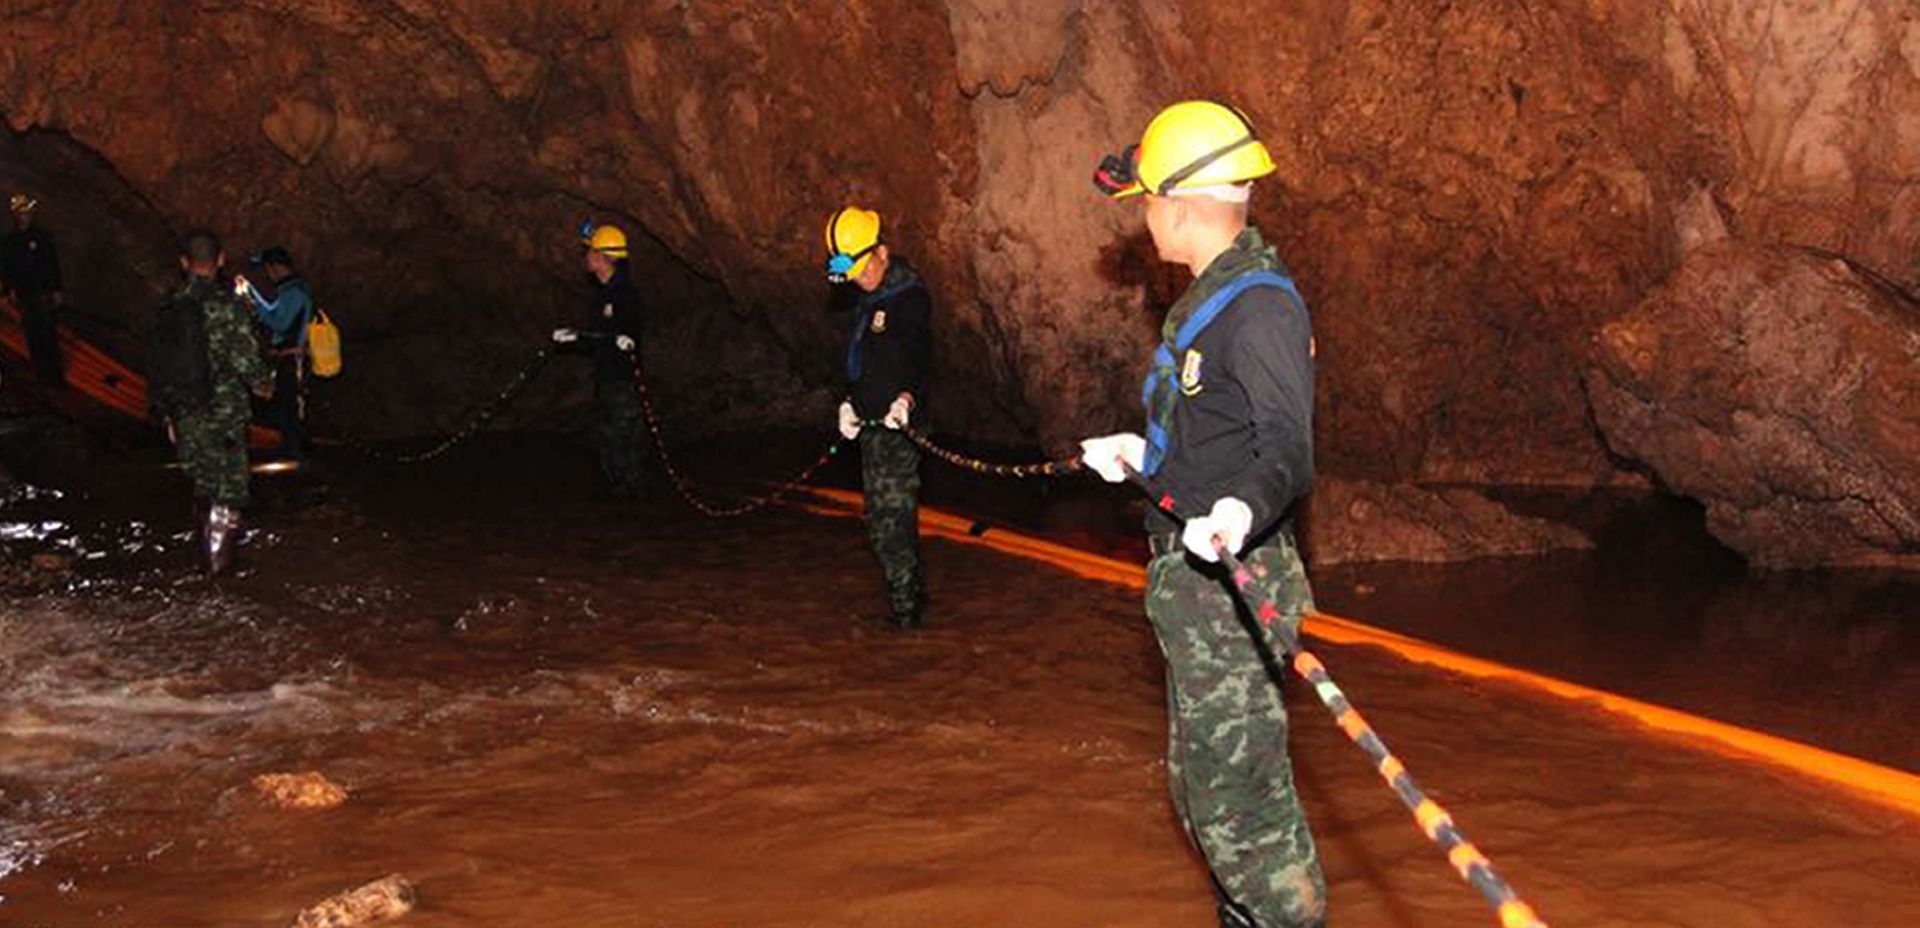 epa06866883 A handout photo made available by the Thai Navy SEAL on 06 July 2018 shows Thai military personnel carrying equipment inside a cave complex during the ongoing rescue operations for the youth soccer team and their assistant coach, at Tham Luang cave in Khun Nam Nang Non Forest Park, Chiang Rai province, Thailand. According to latest reports, a former Thai Navy diver has died during the rescue operations to safely bring out the youth soccer team out of the cave. Rescuers are bringing supplies and food into the cave, where the missing 12 boys and their coach remain trapped since 23 June, as efforts to drain the cave have not been successful due to rainy weather.  EPA/THAI NAVY SEAL HANDOUT  HANDOUT EDITORIAL USE ONLY/NO SALES